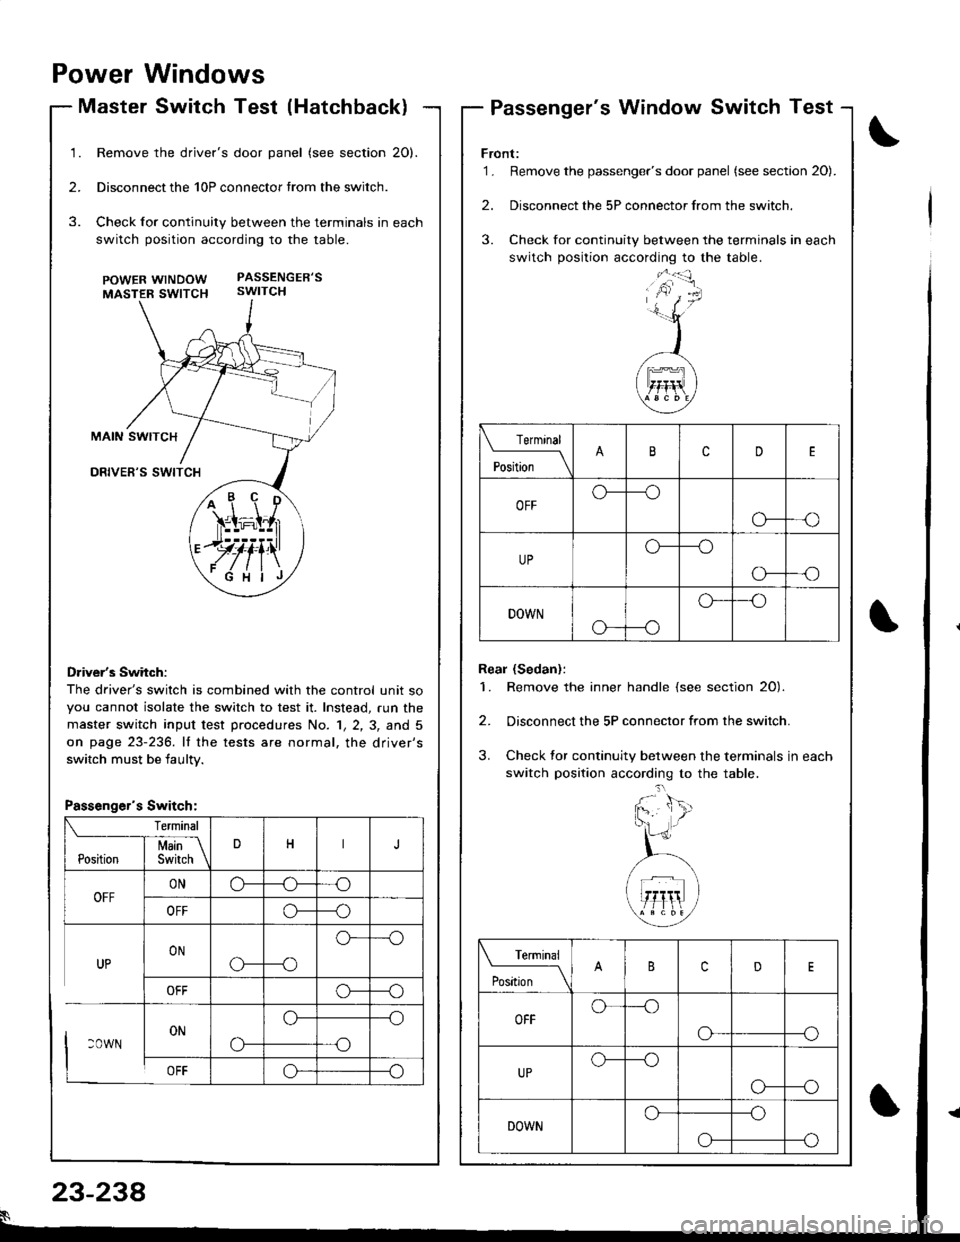 HONDA INTEGRA 1998 4.G Workshop Manual Power Windows
Master Switch Test (Hatchback)Passengers Window Switch Test
Remove the drivers door panel (see section 20).
Disconnect the 10P connector trom the switch.
Check for continuity between t